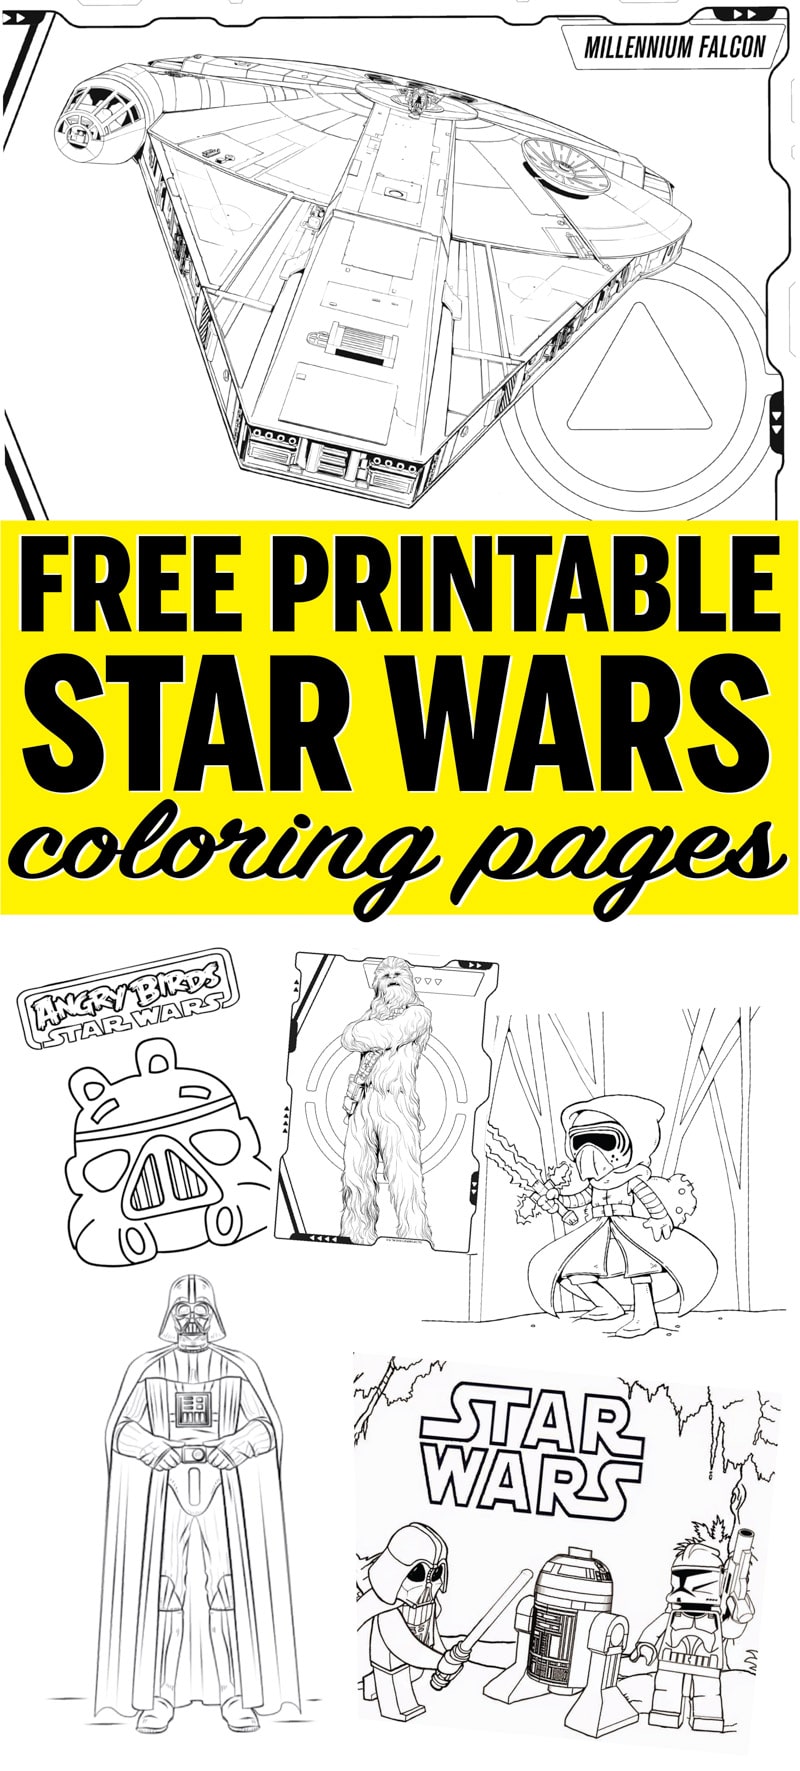 Free Printable Star Wars Coloring Pages - 3